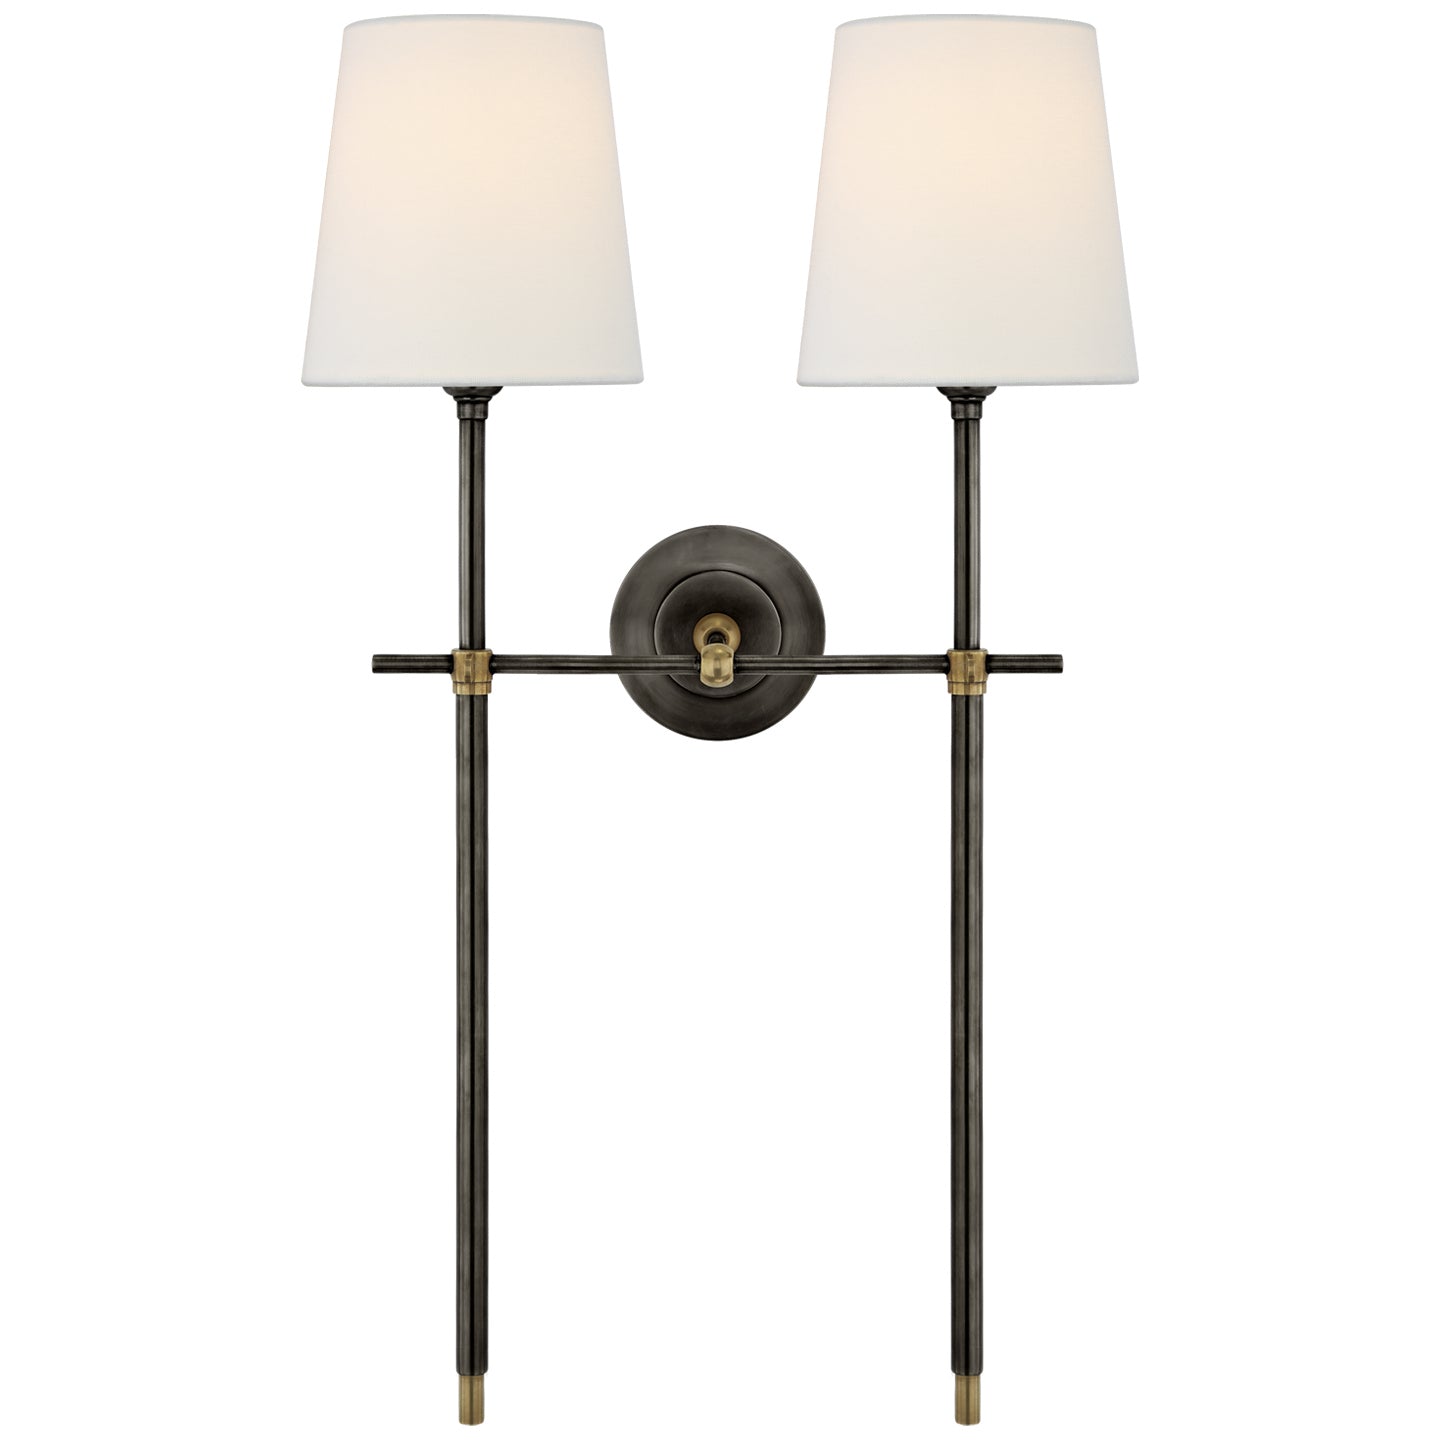 Visual Comfort Signature Canada - Two Light Wall Sconce - Bryant - Bronze and Hand-Rubbed Antique Brass- Union Lighting Luminaires Decor